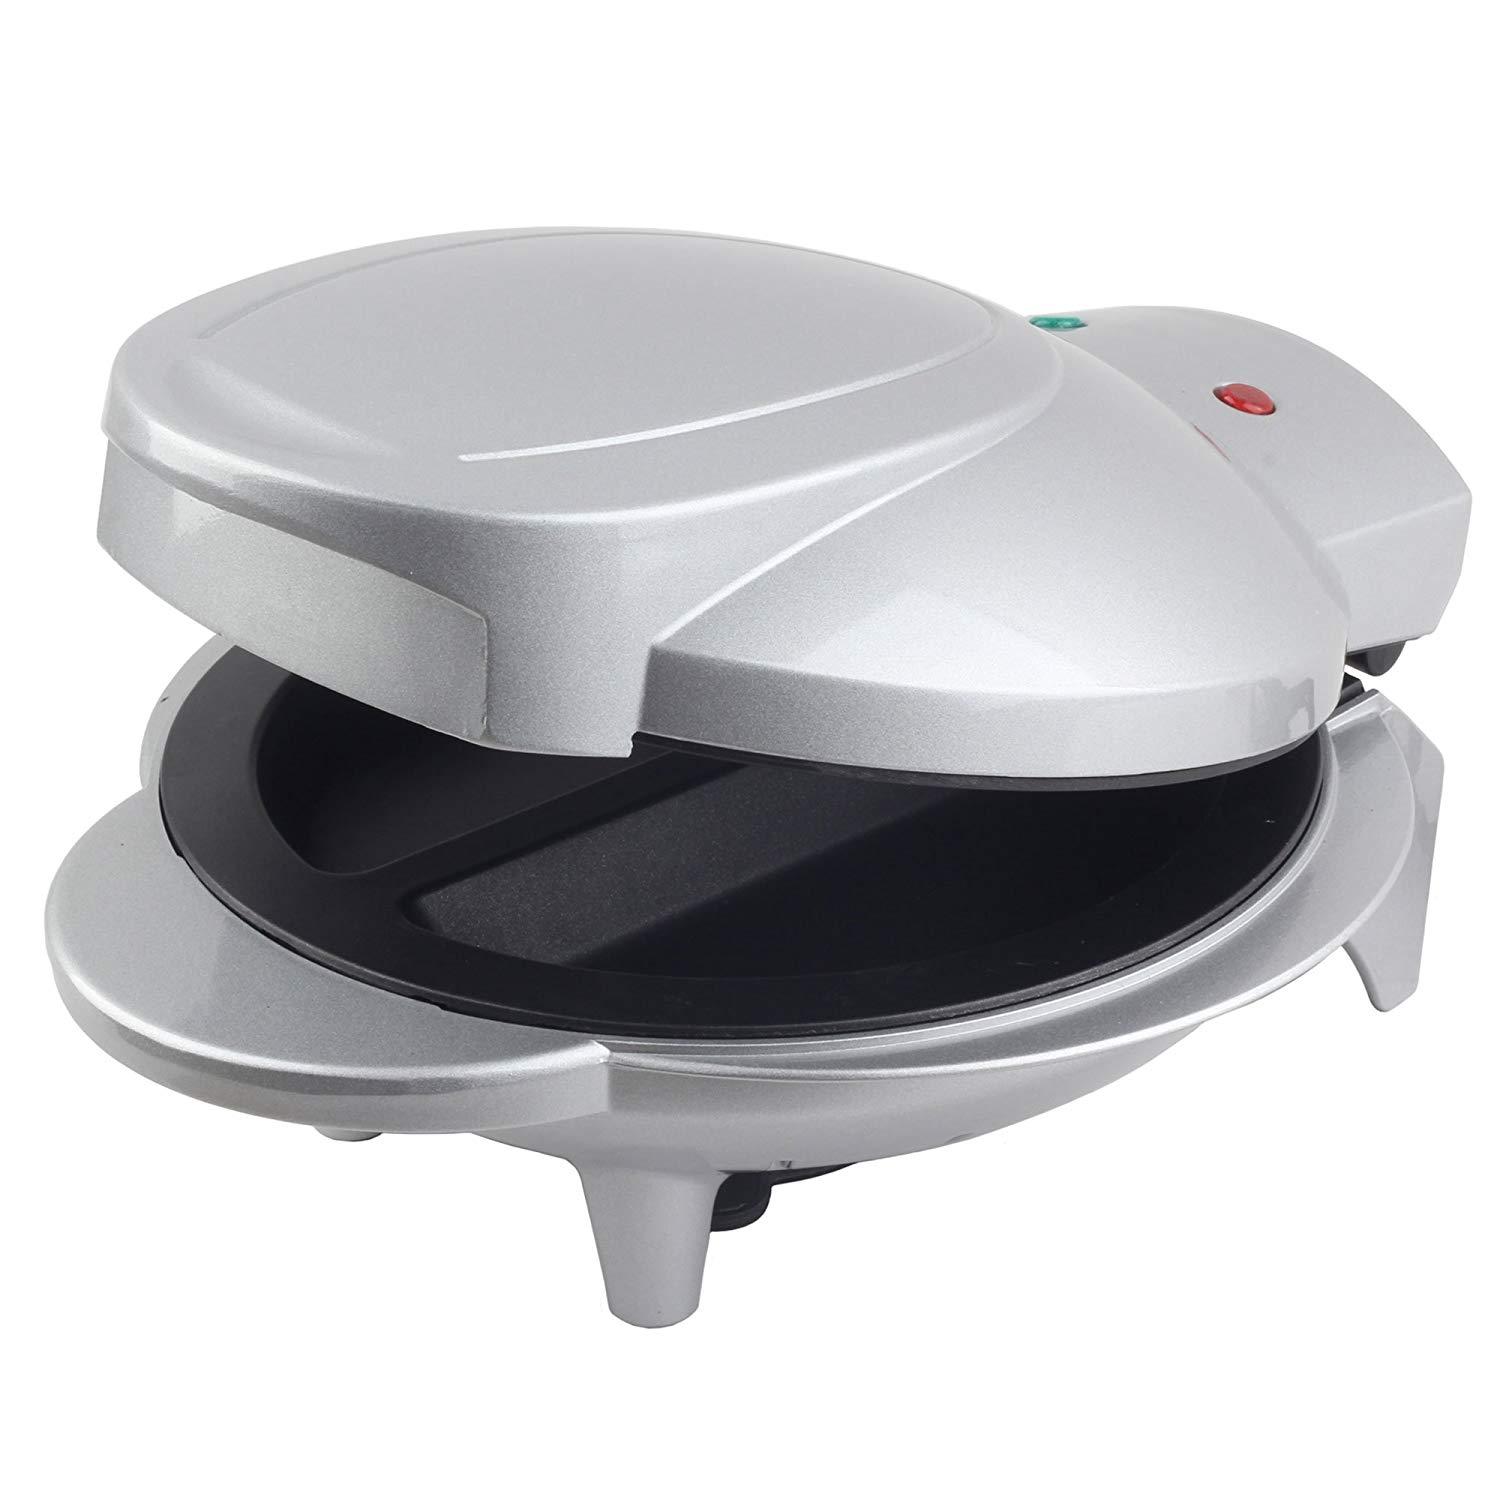 BRENTWOOD® APPLIANCES TS-255 NONSTICK ELECTRIC OMELET MAKER